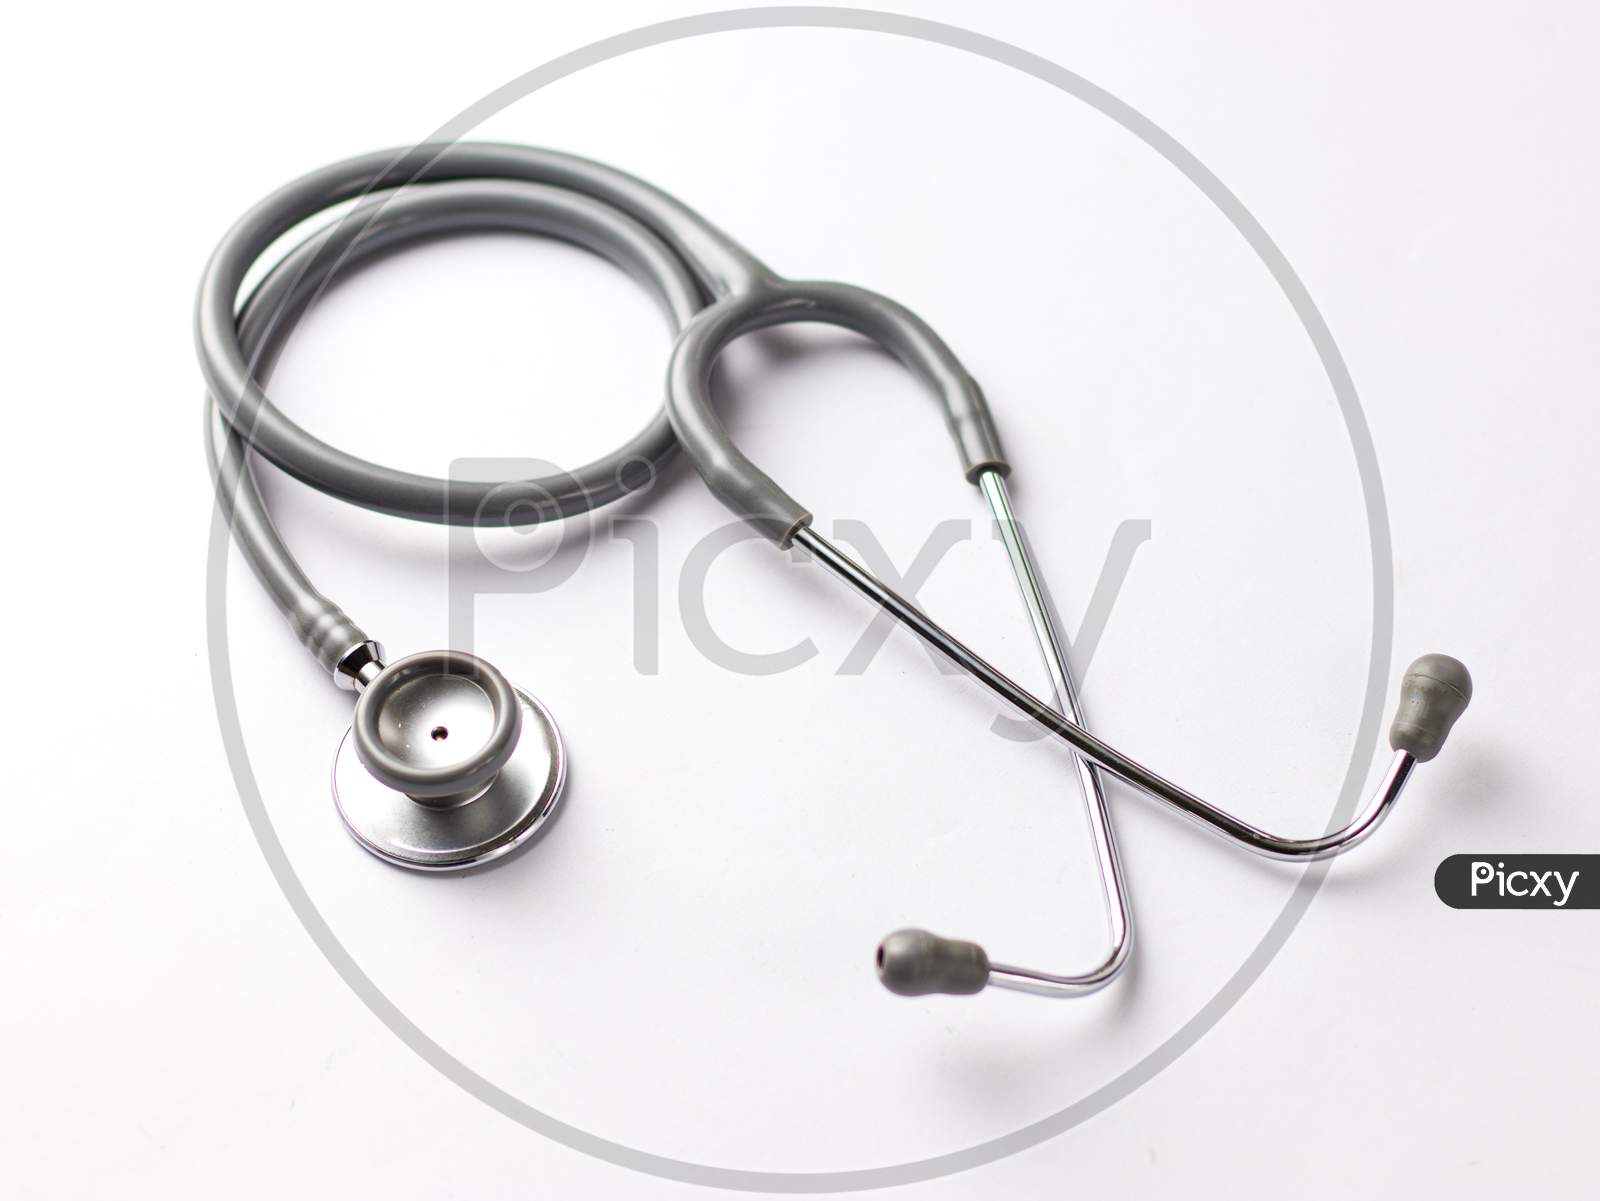 Stethoscope photos for commercial uses.